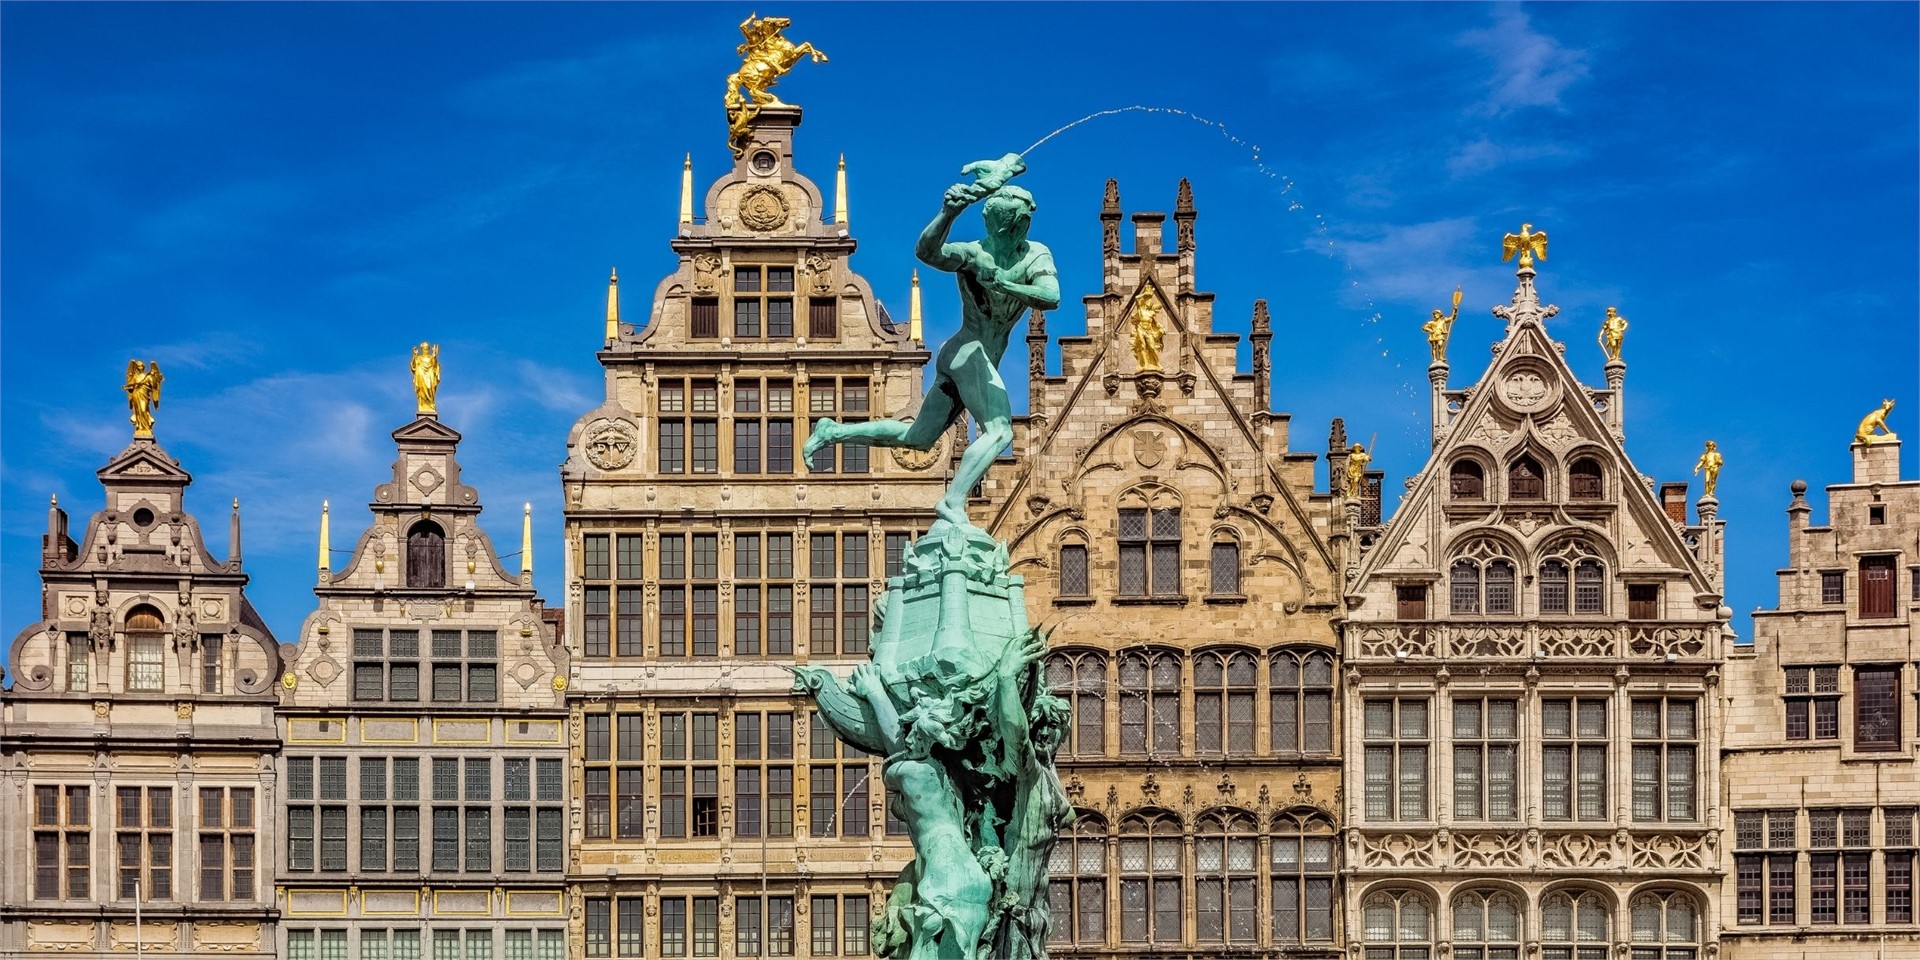 Accommodation, guesthouses and hotels in Brussels